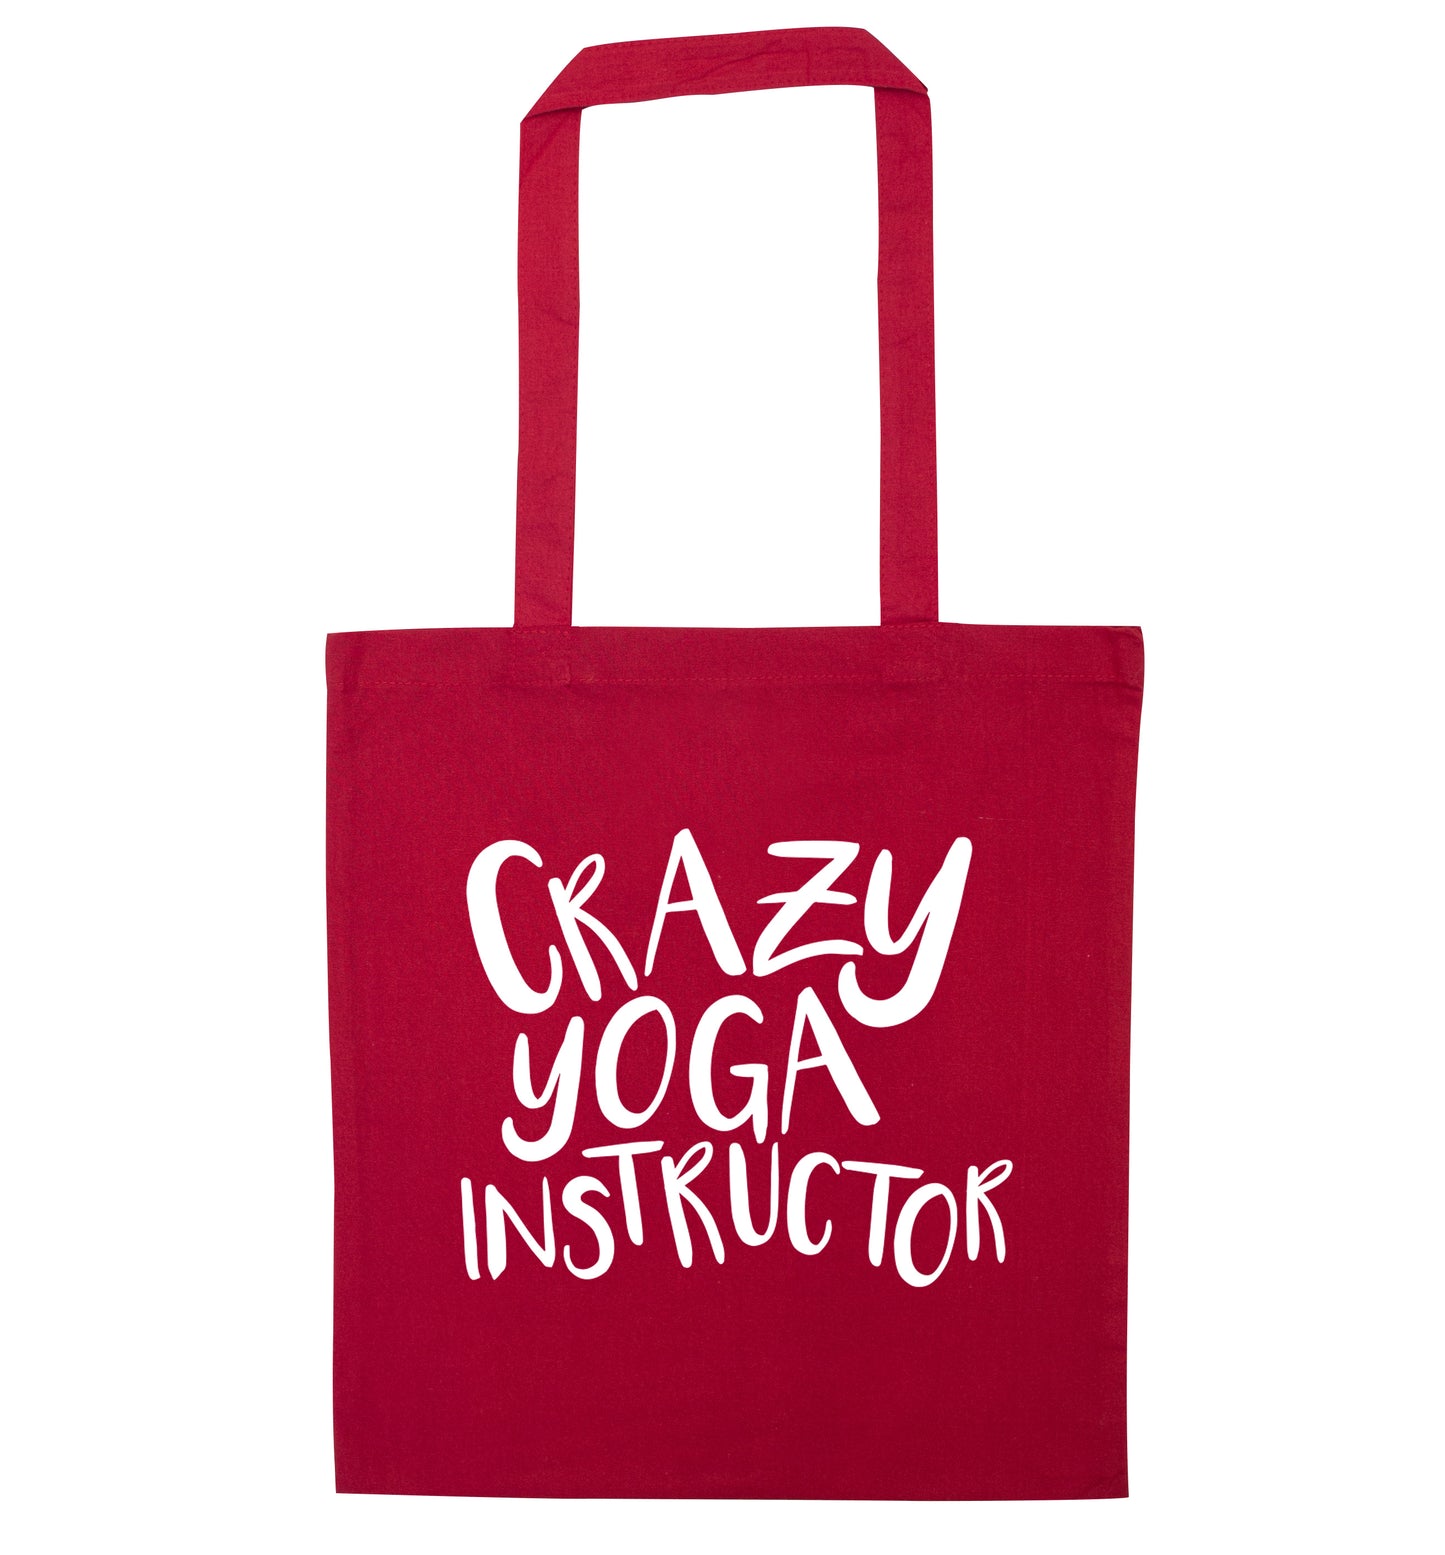 Crazy yoga instructor red tote bag